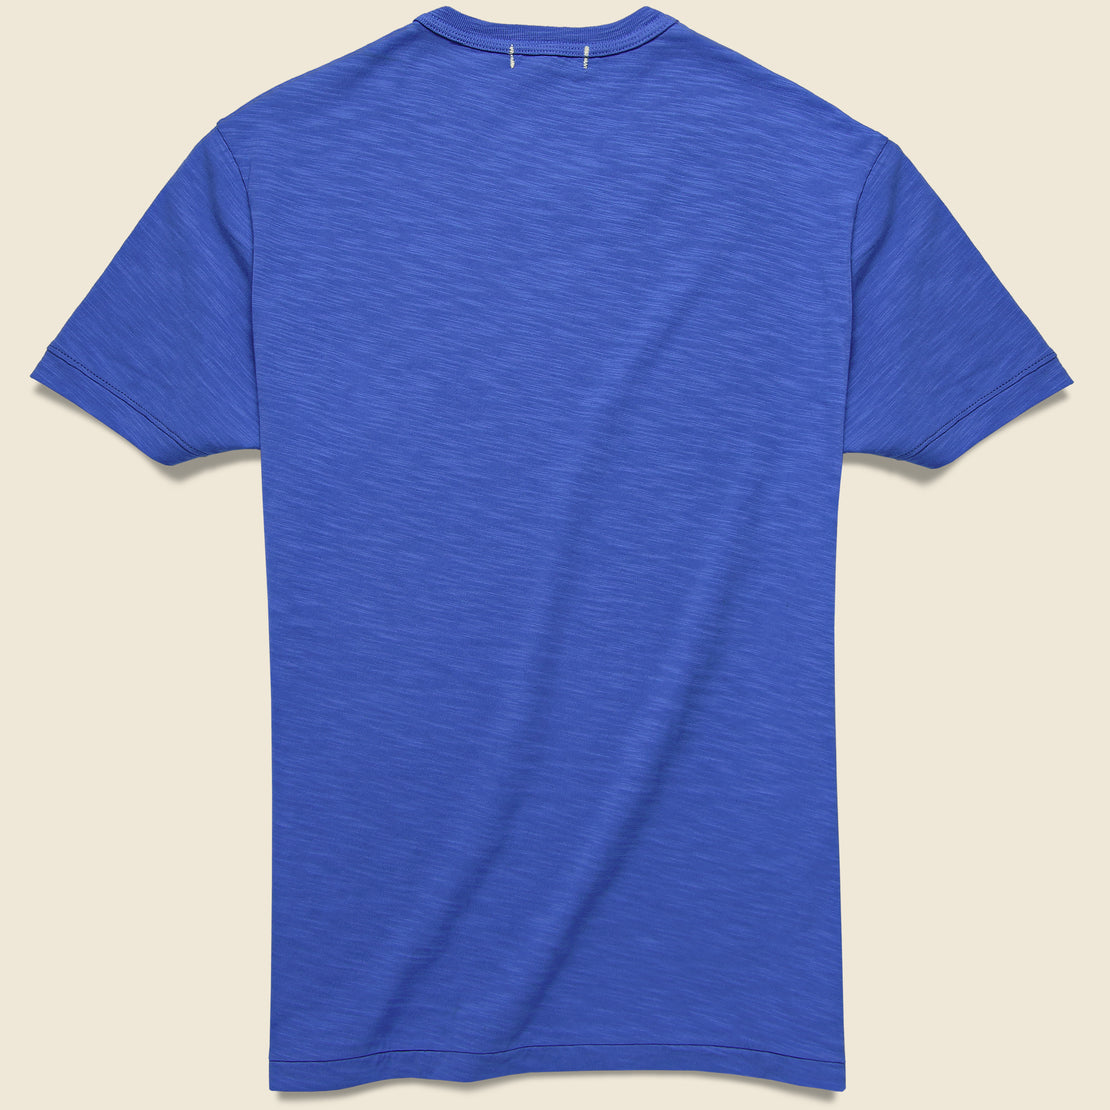 Standard Crew Tee - Washed Cobalt - Alex Mill - STAG Provisions - Tops - S/S Tee